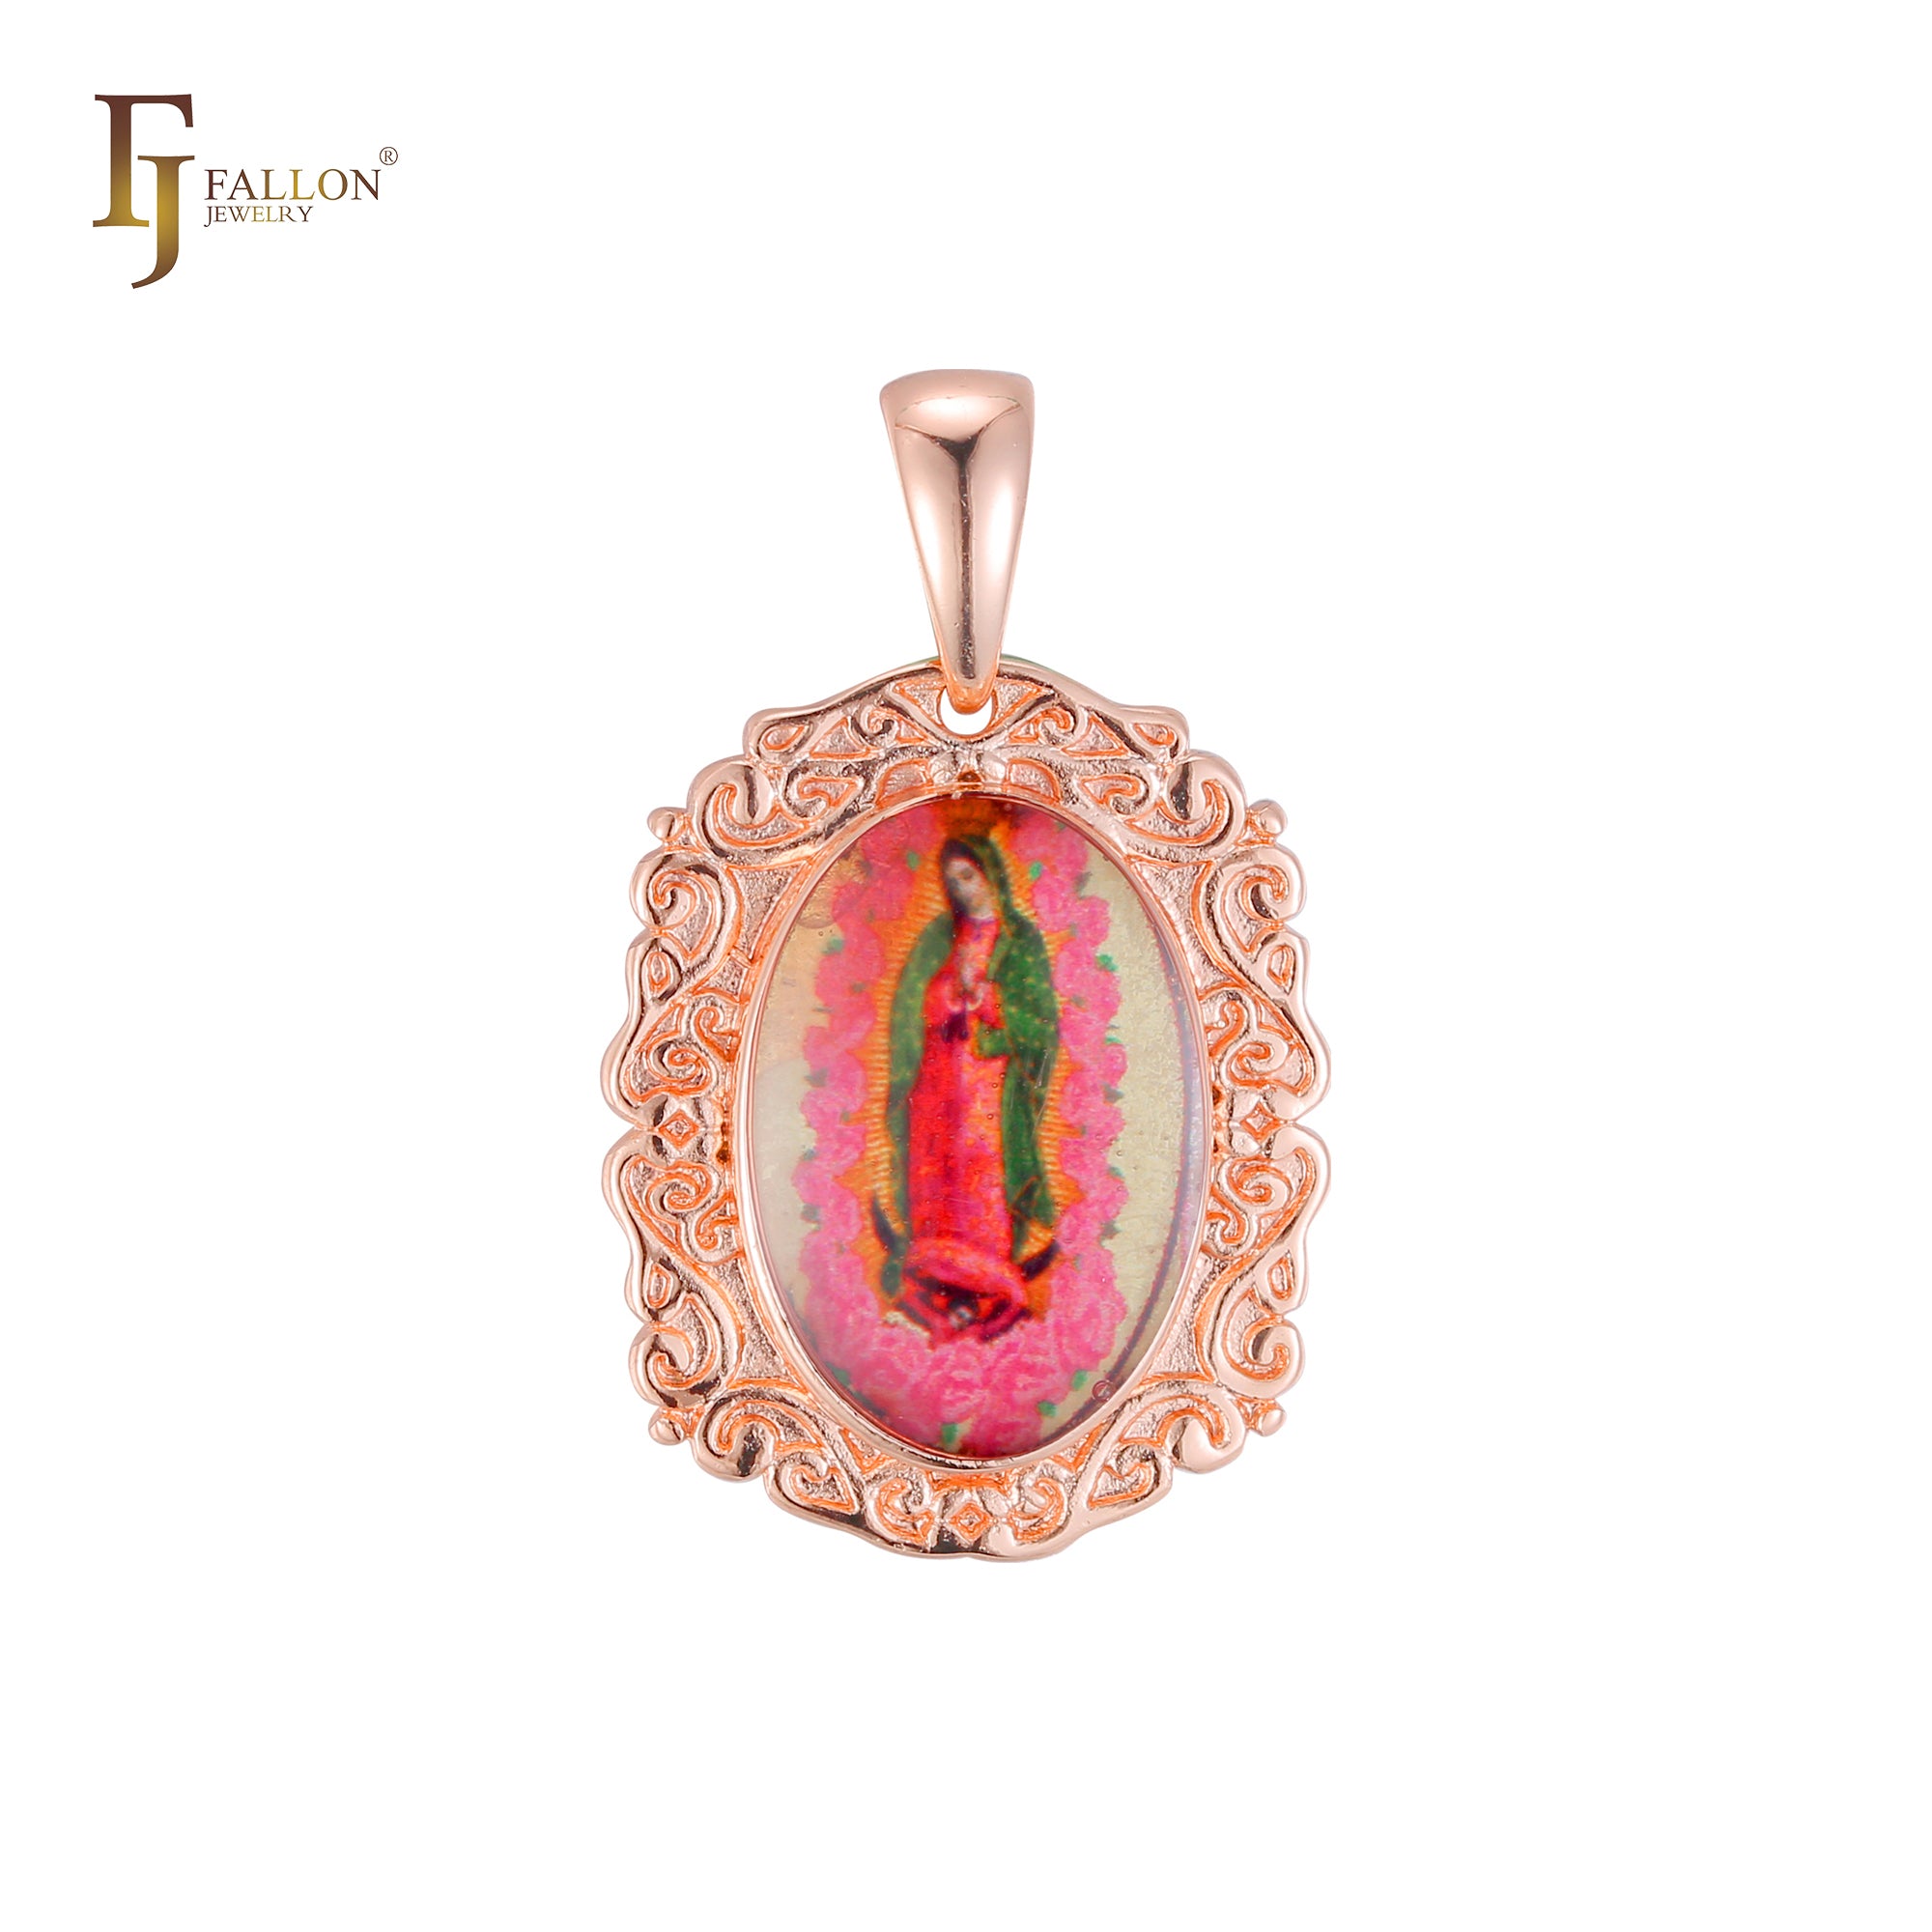 Religious portrait gallery pendant of Virgin Mary Guadalupe or Saint Matrona